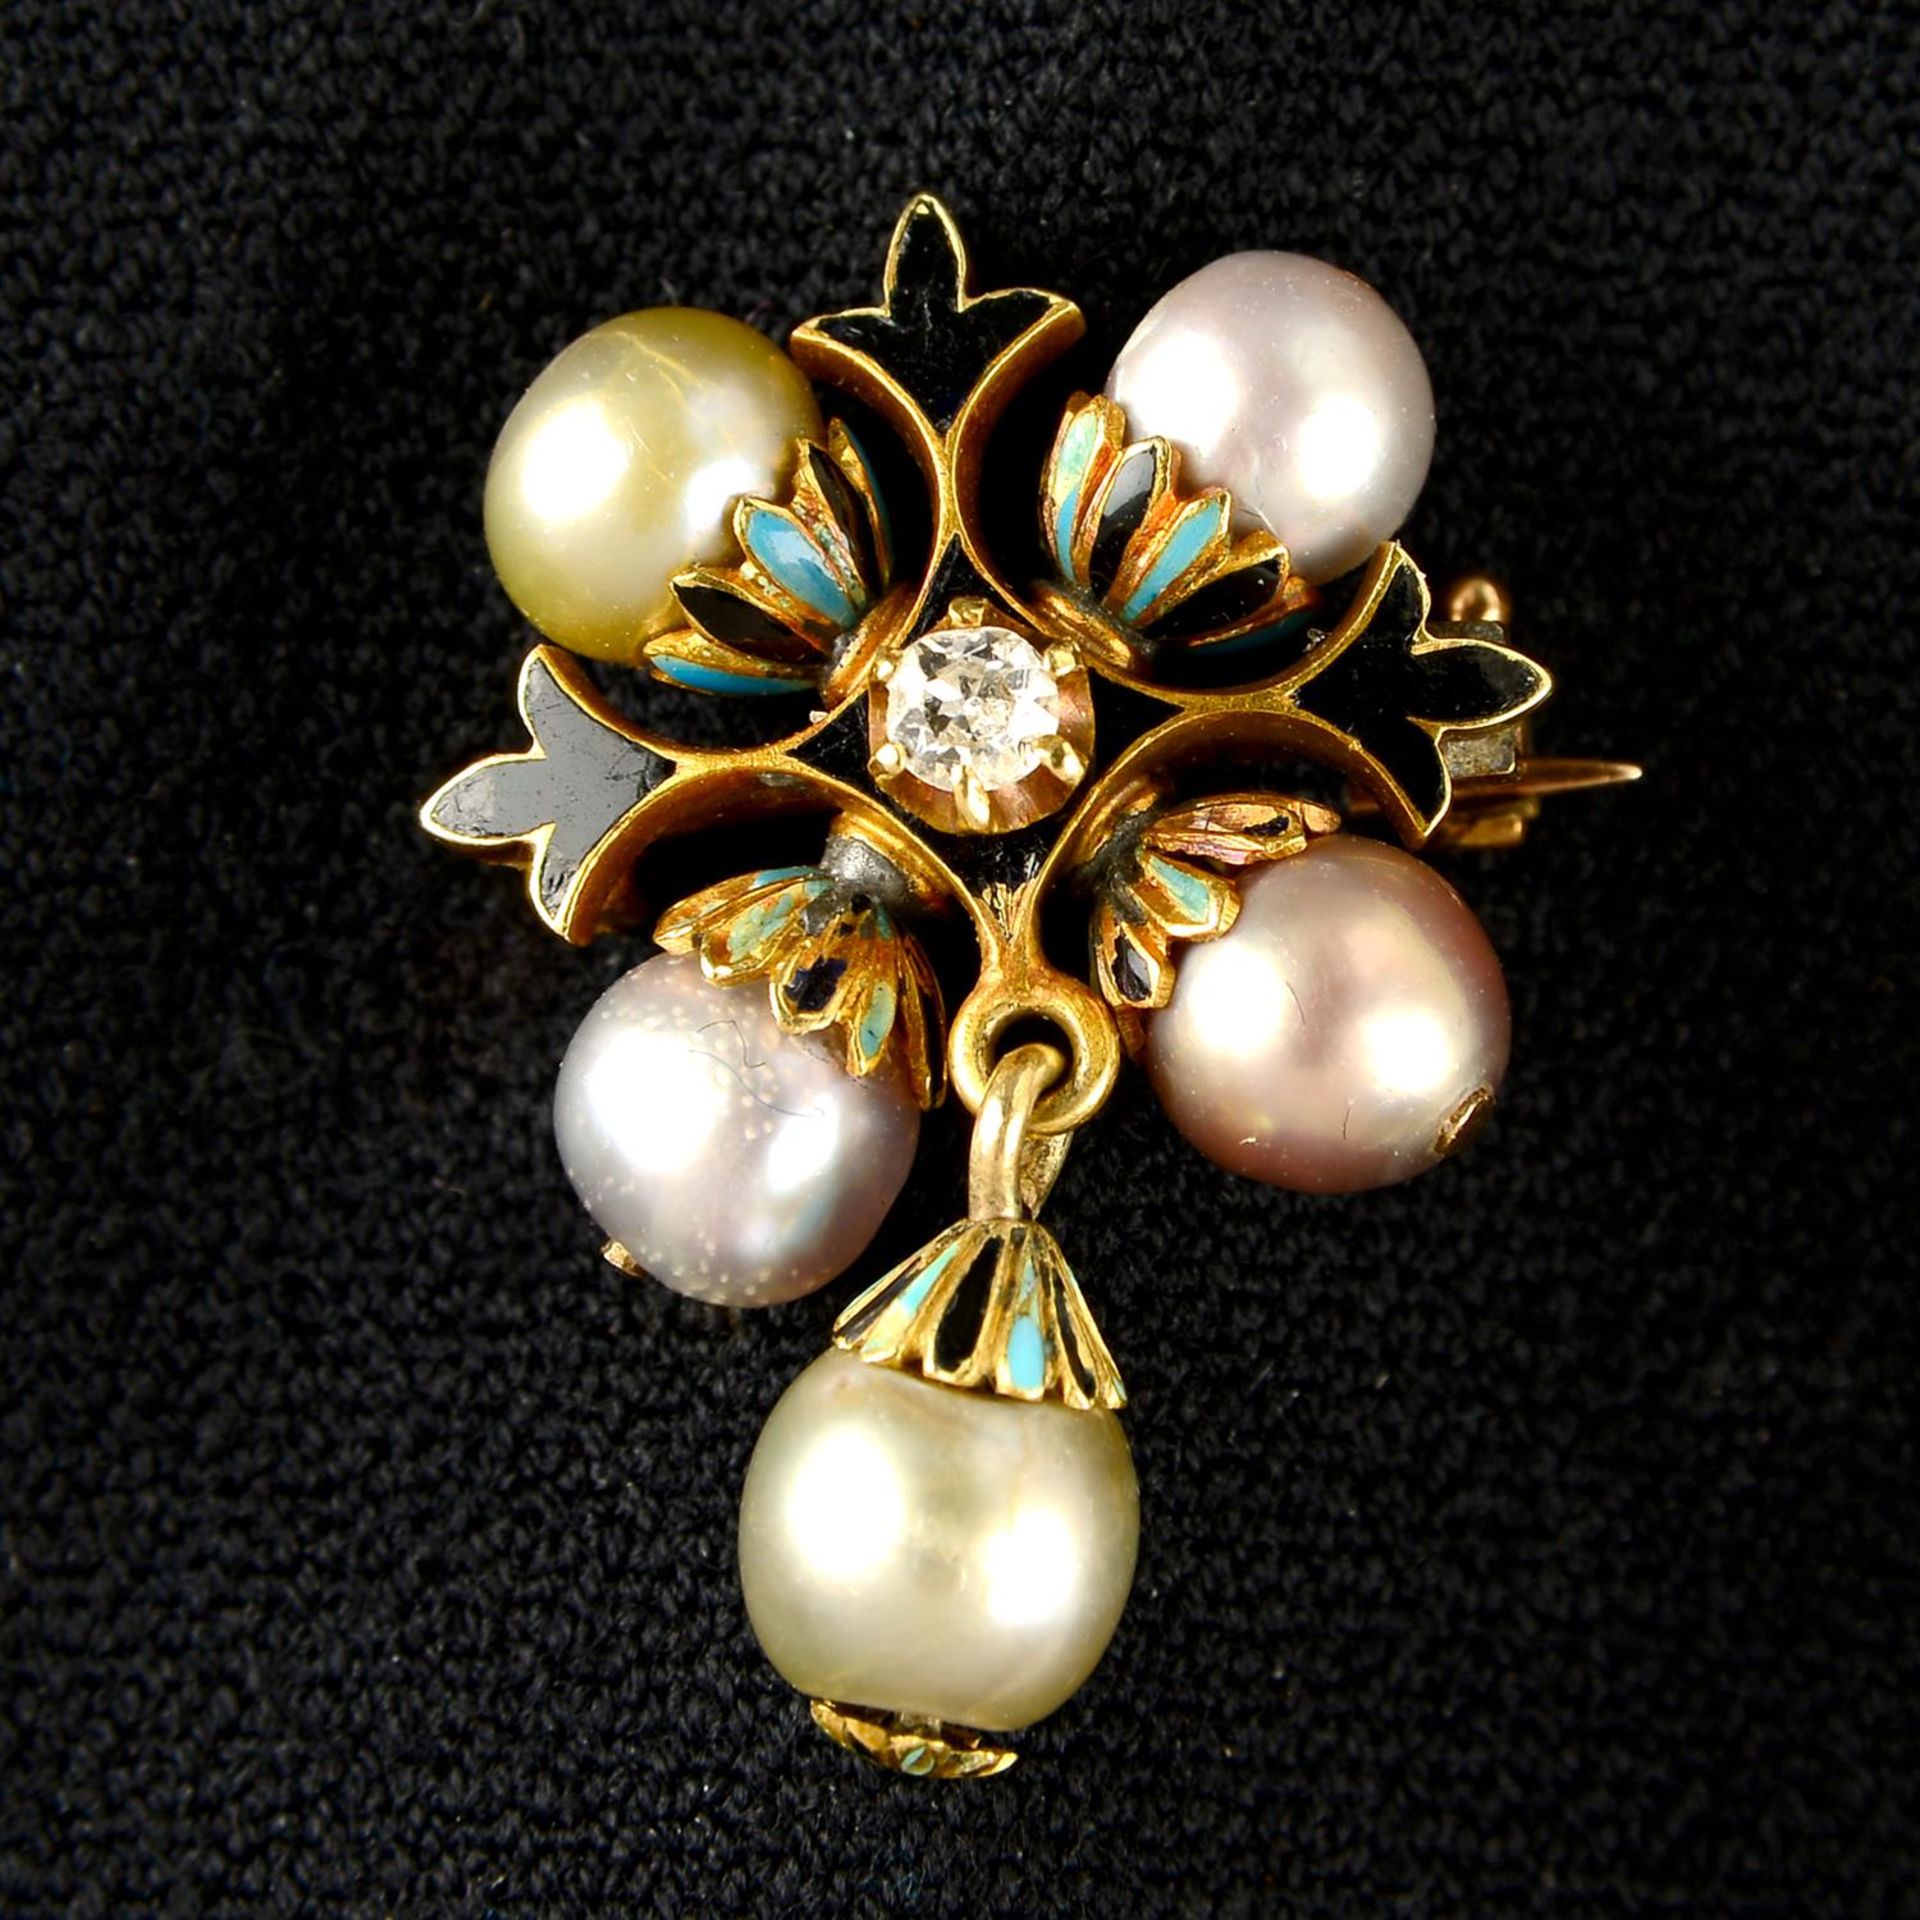 A mid to late 19th century gold, old-cut diamond, enamel and pearl pendant.